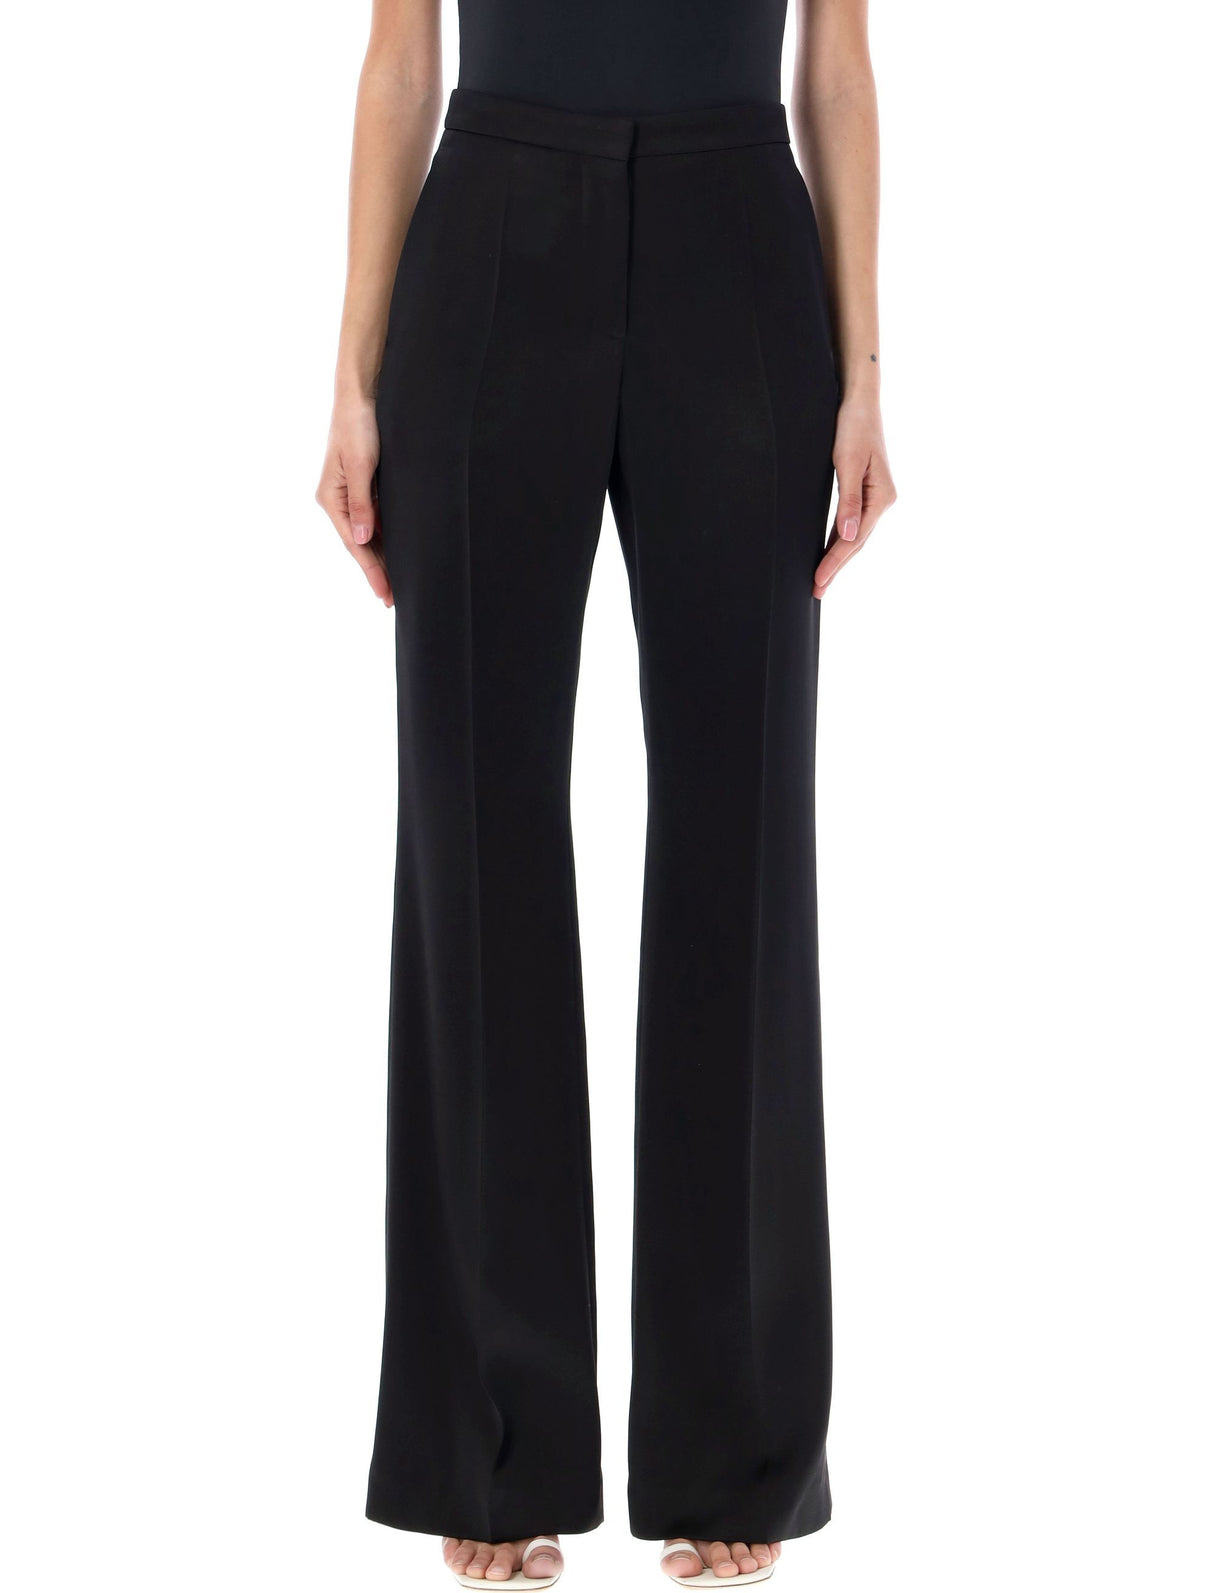 GIVENCHY Stylish and Classic Flare Tailoring Pants for Women - Black